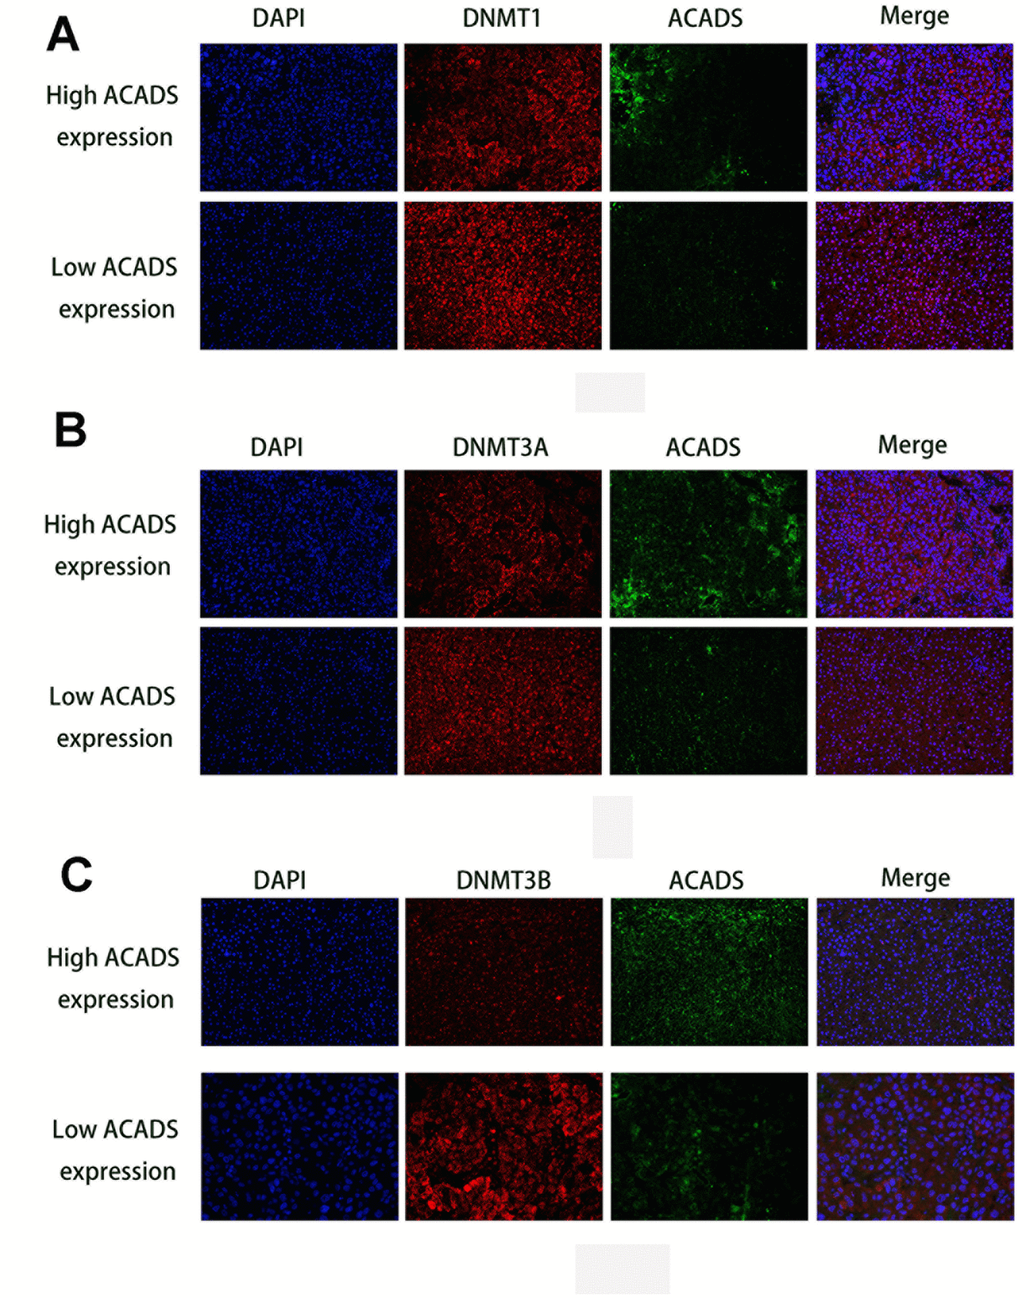 Immunofluorescence staining results of DNMTs and ACADS in HCC microarrays. (A) Immunofluorescence staining of DNMT1 (red) and ACADS (green) in high and low ACADS groups. (B) Immunofluorescence staining of DNMT3A (red) and ACADS (green) in high and low ACADS groups. (C) Immunofluorescence staining of DNMT3B (red) and ACADS (green) in high and low ACADS groups.